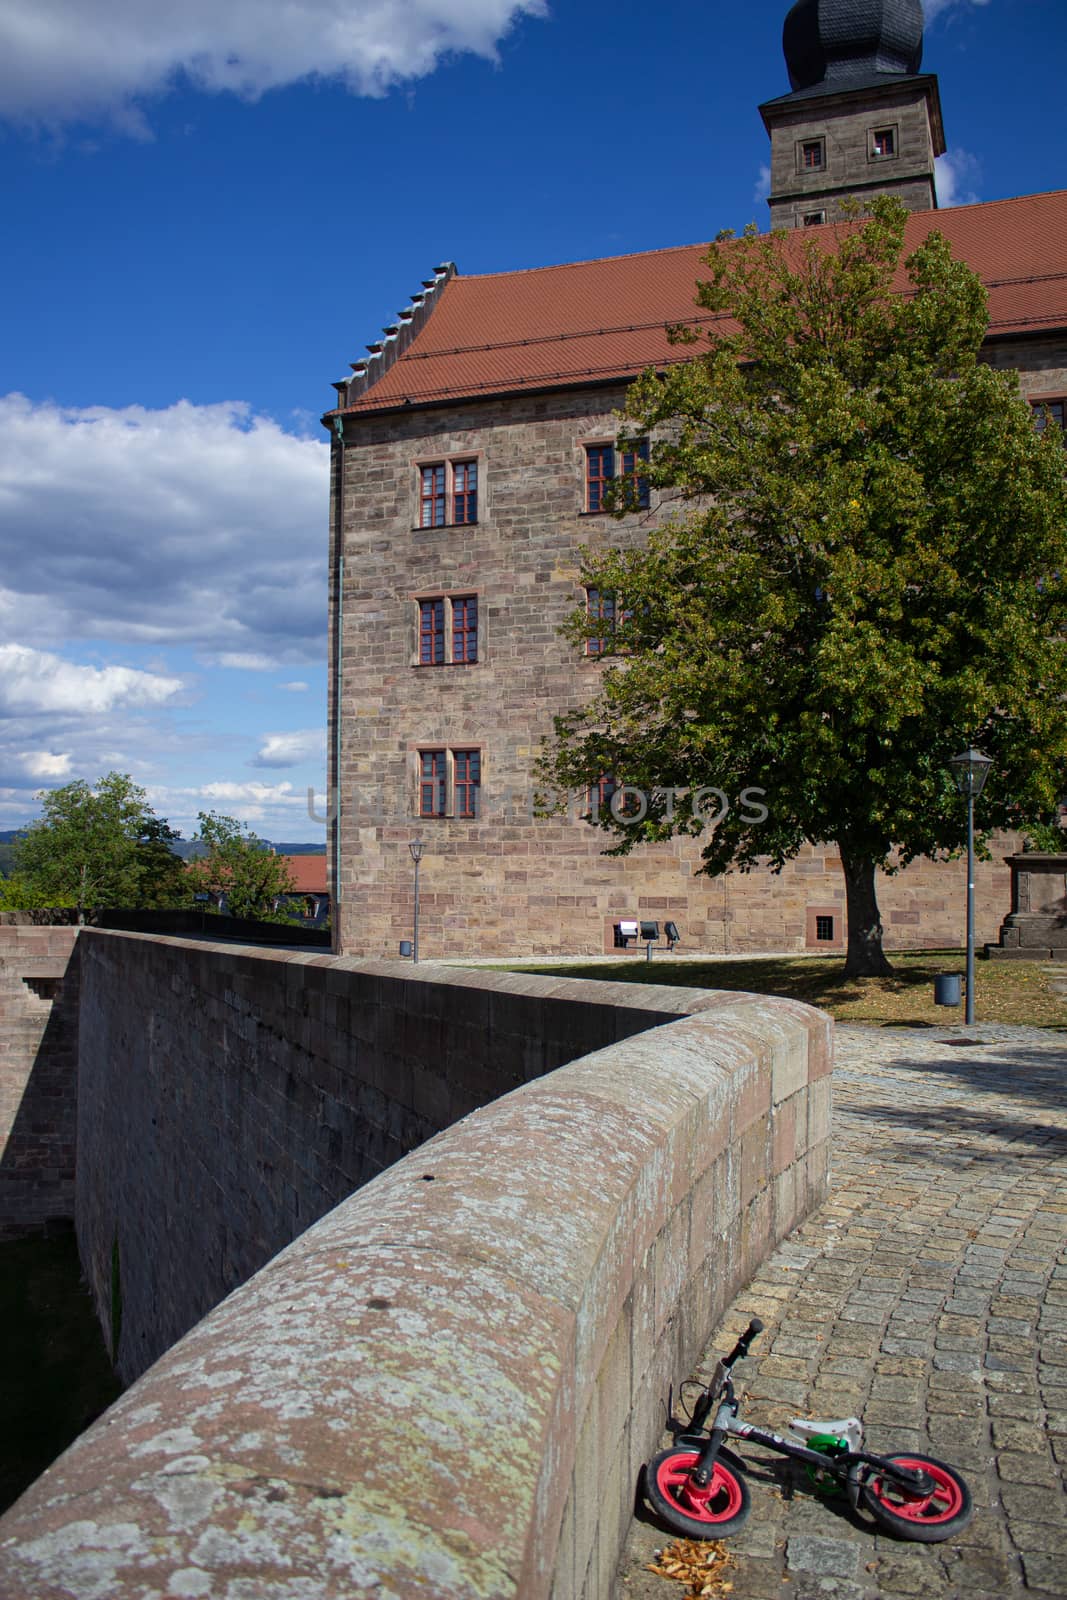 Observation deck of an old castle in Germany. Beautiful views by AnatoliiFoto